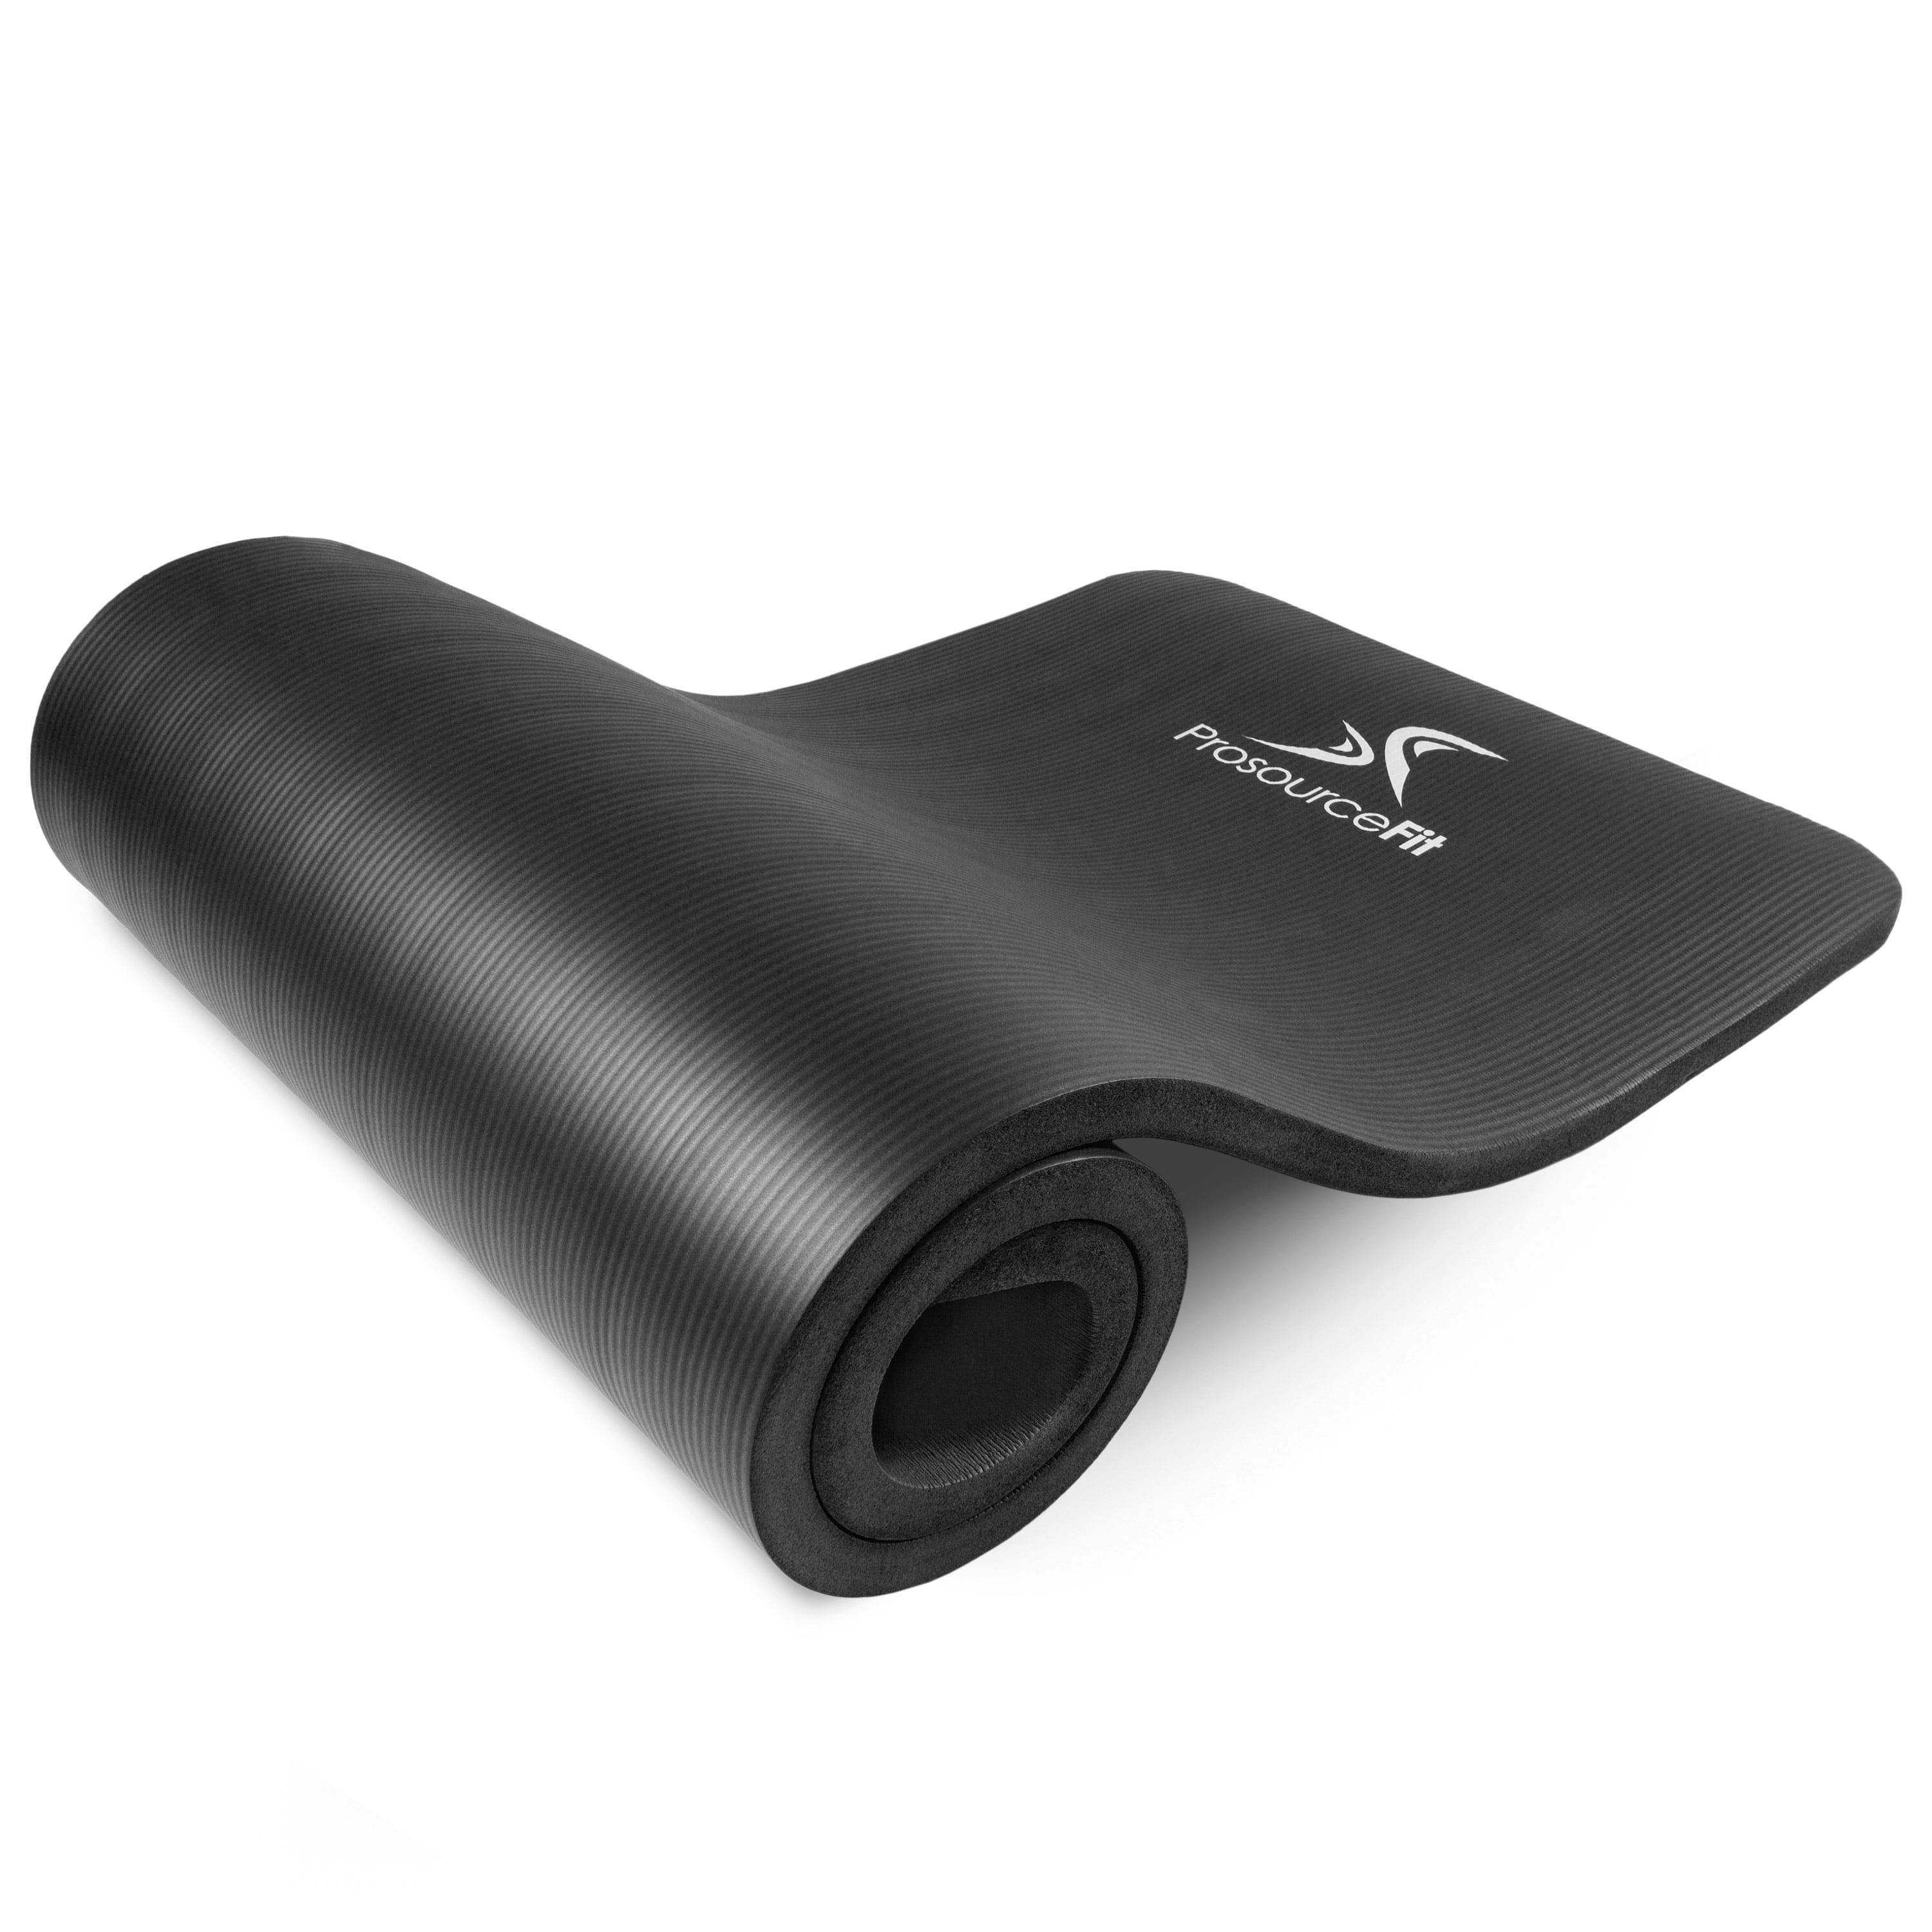 Prosourcefit Extra Thick Yoga and Pilates Mat 1 In. Black